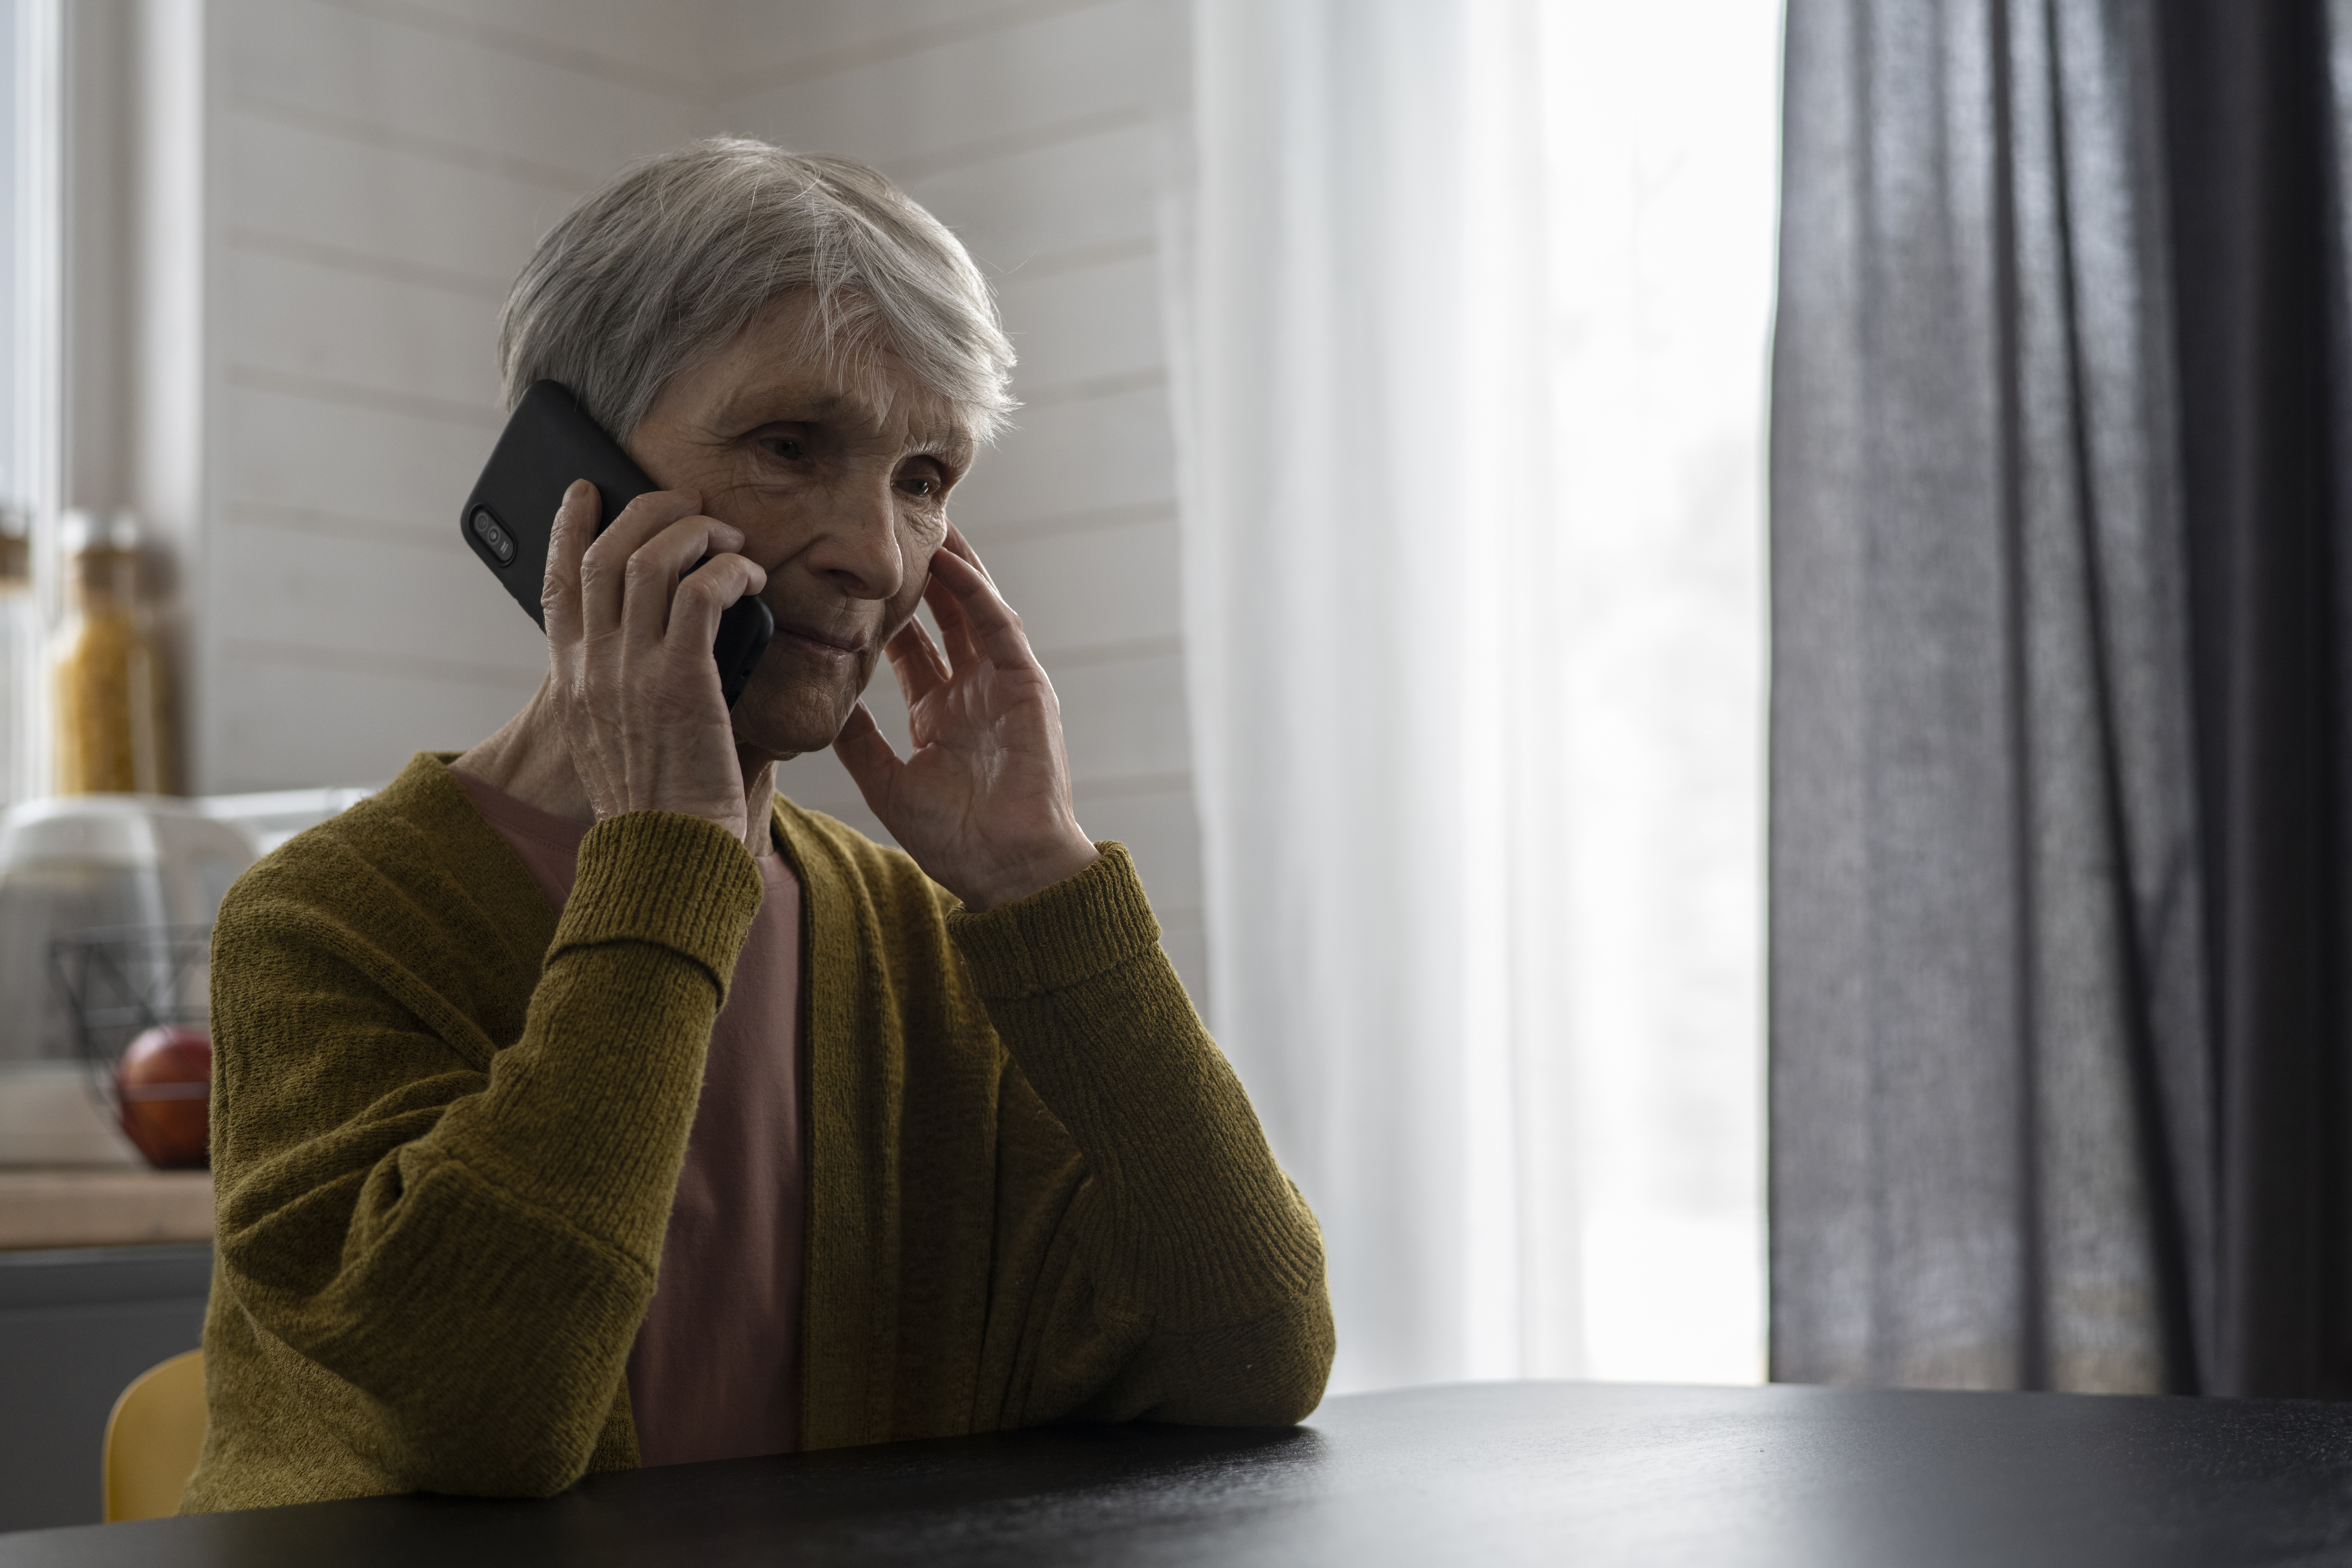 An elderly woman looking worried while on the phone | Source: Freepik